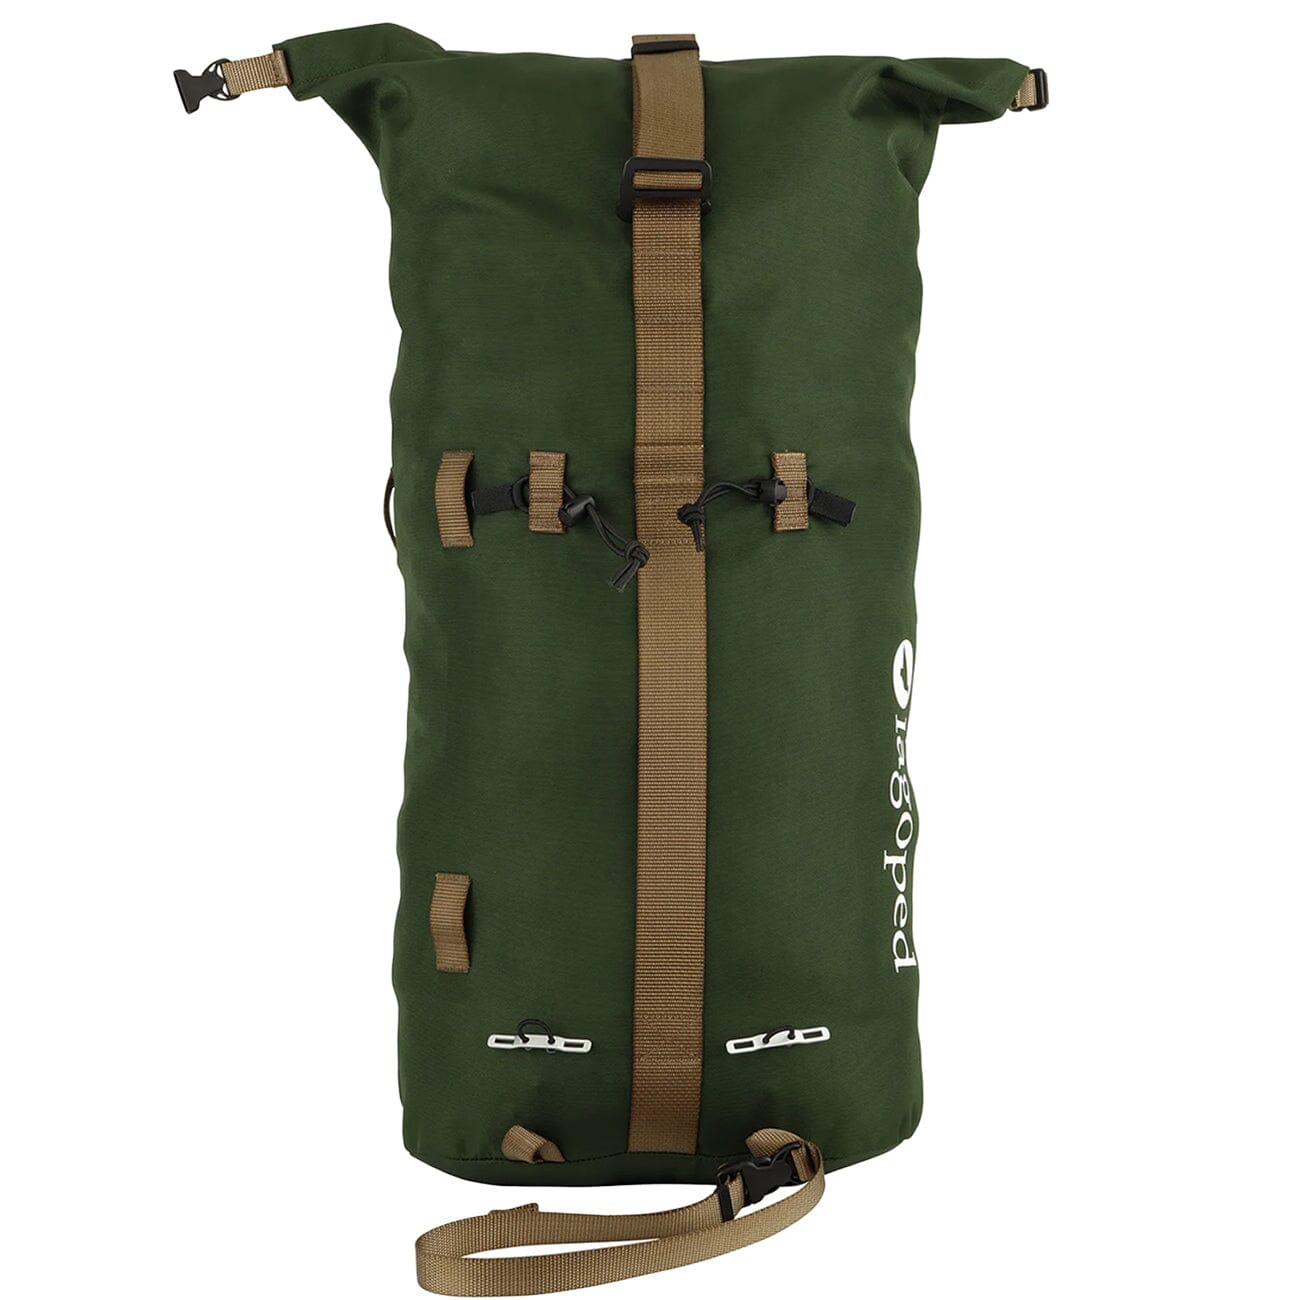 green mountaineering backpack made in europe